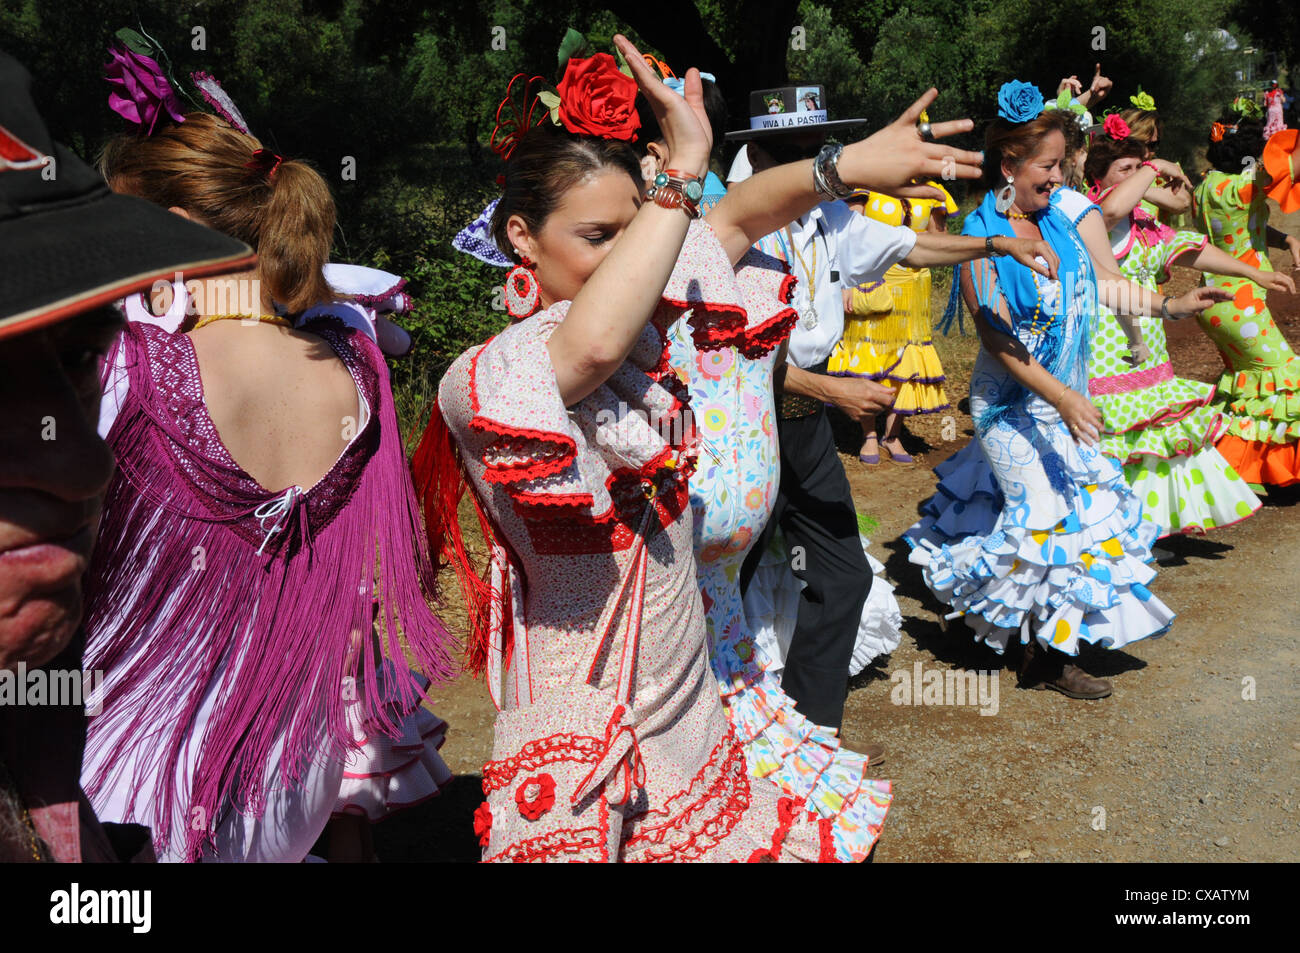 Women dancing in national flamenco dress on track during annual Romaria. Stock Photo